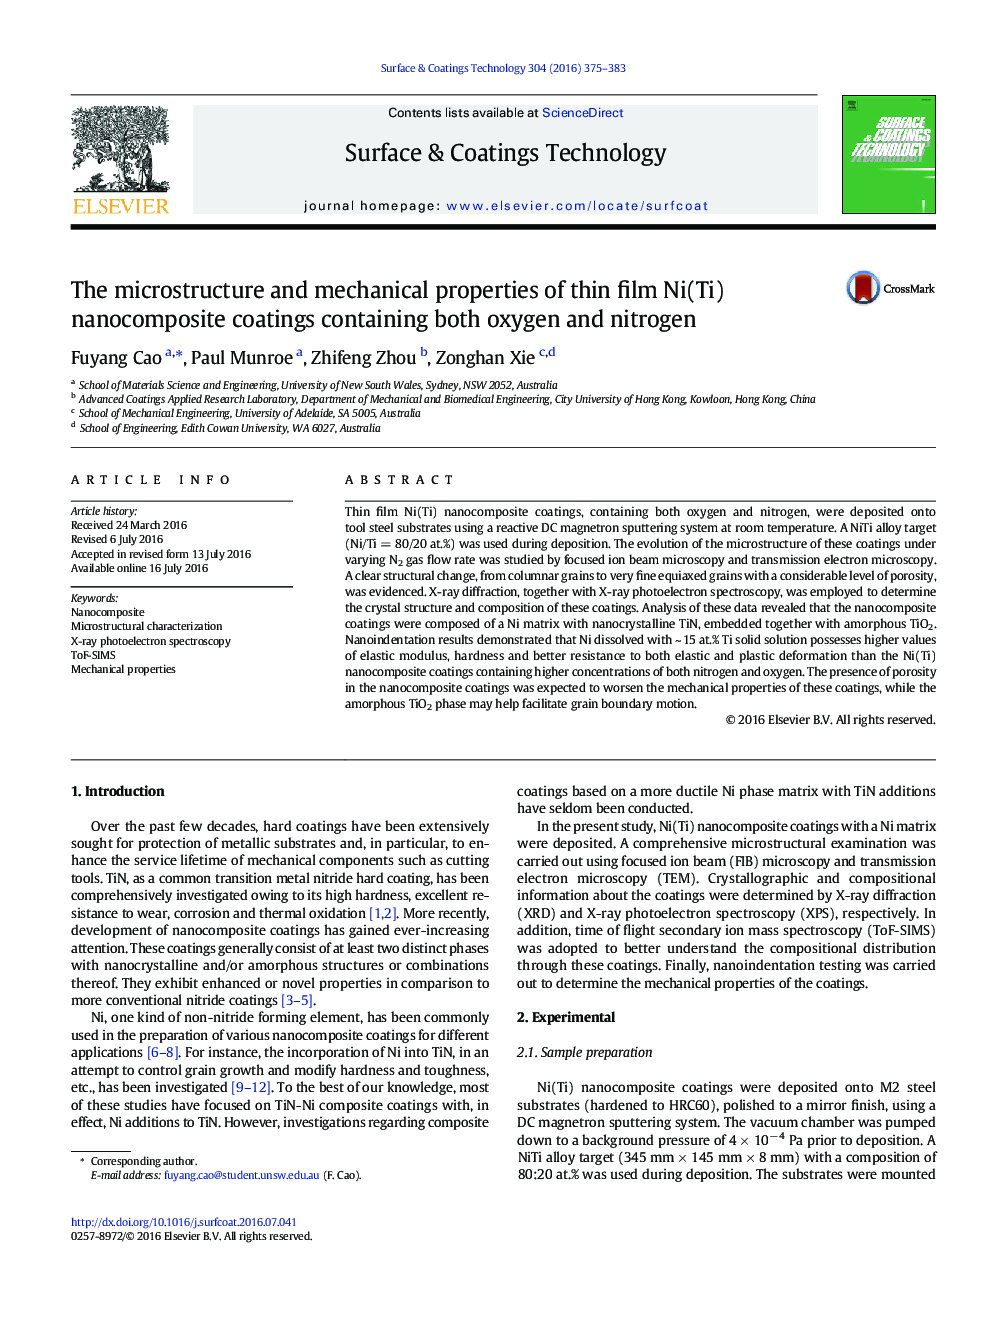 The microstructure and mechanical properties of thin film Ni(Ti) nanocomposite coatings containing both oxygen and nitrogen